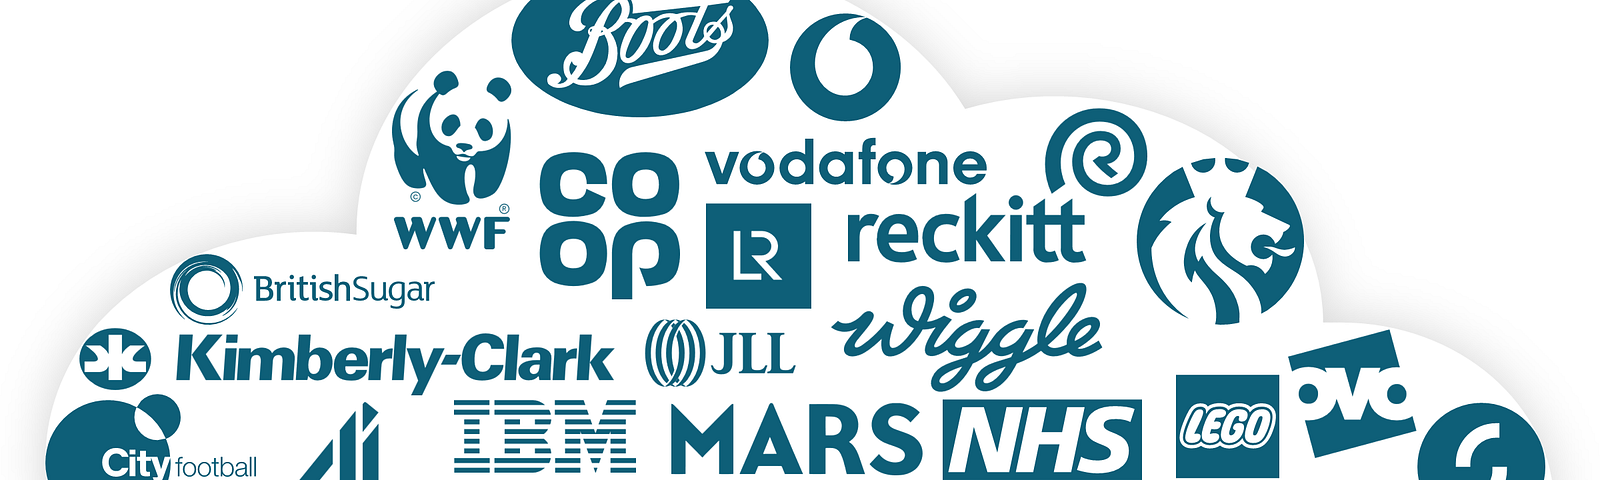 Various logos that roughly form a cloud shape